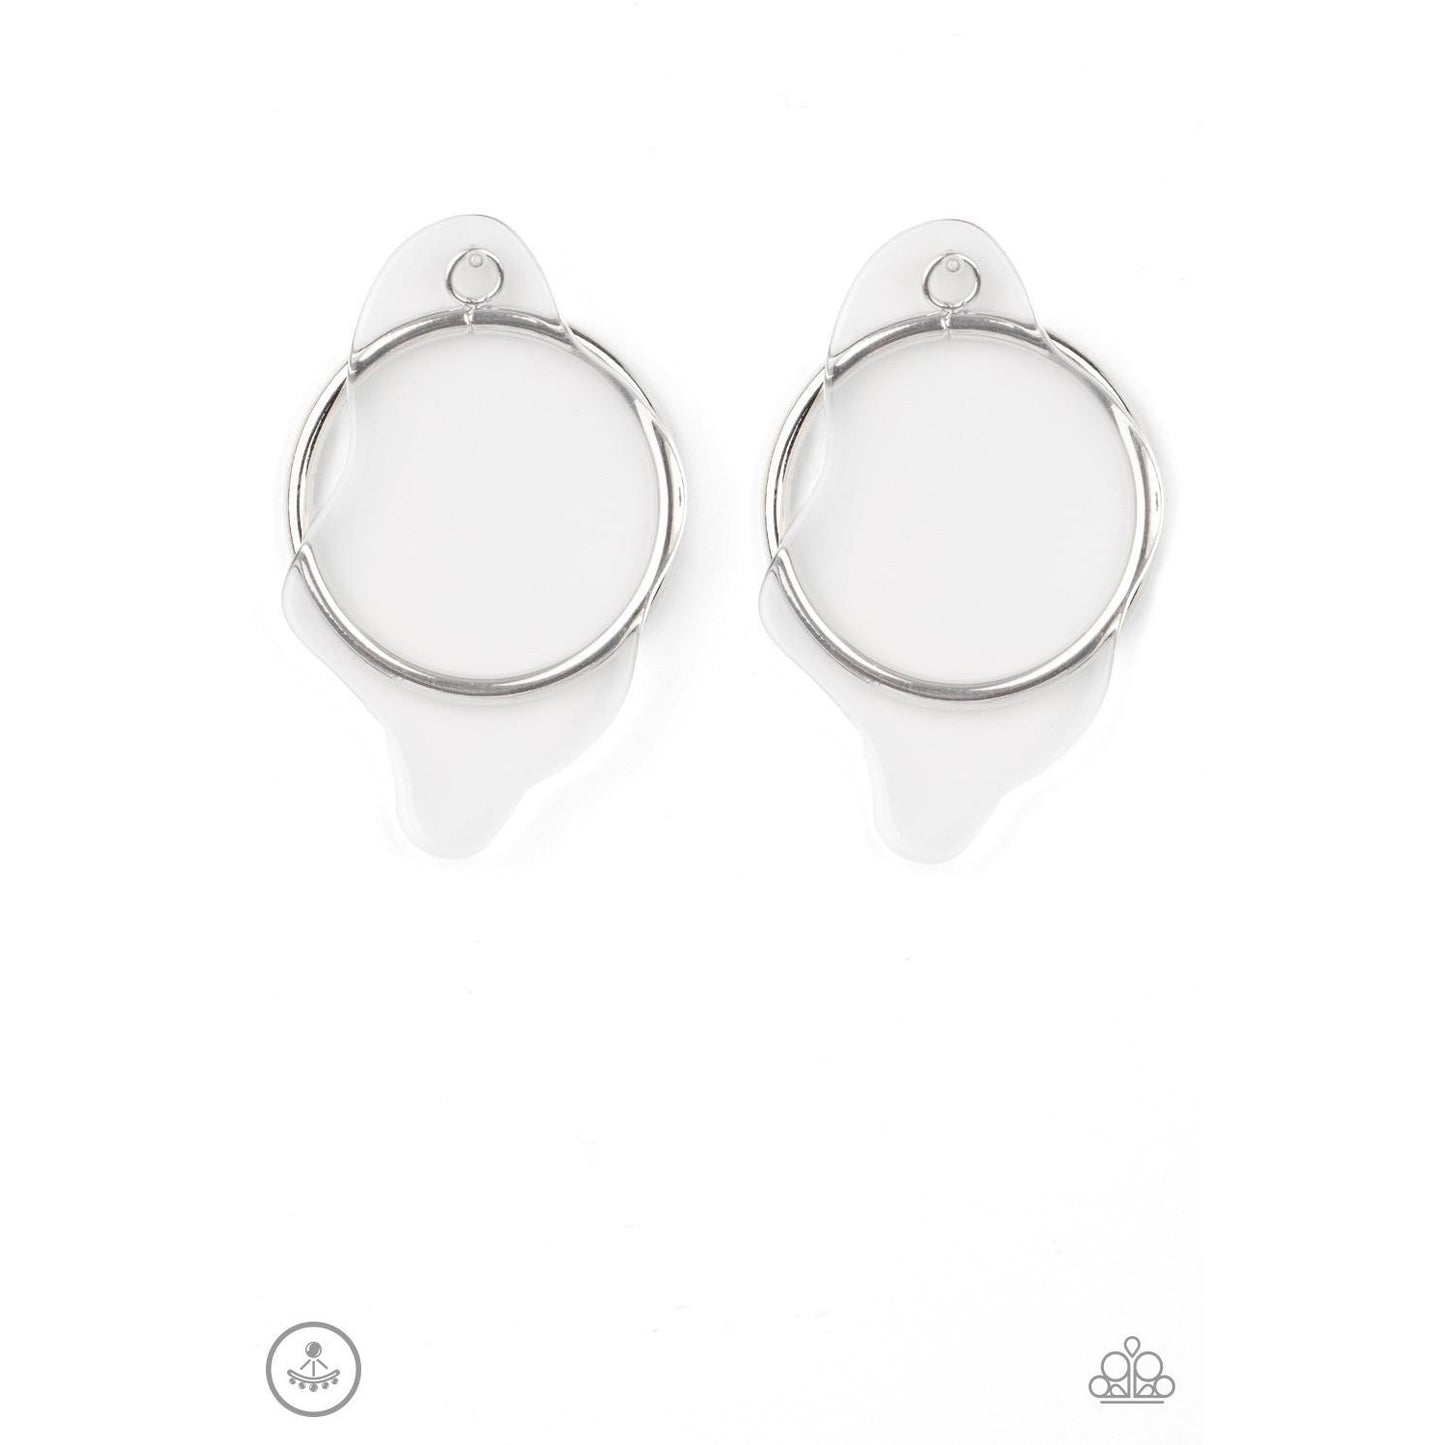 Clear The Way! - White Earrings 758